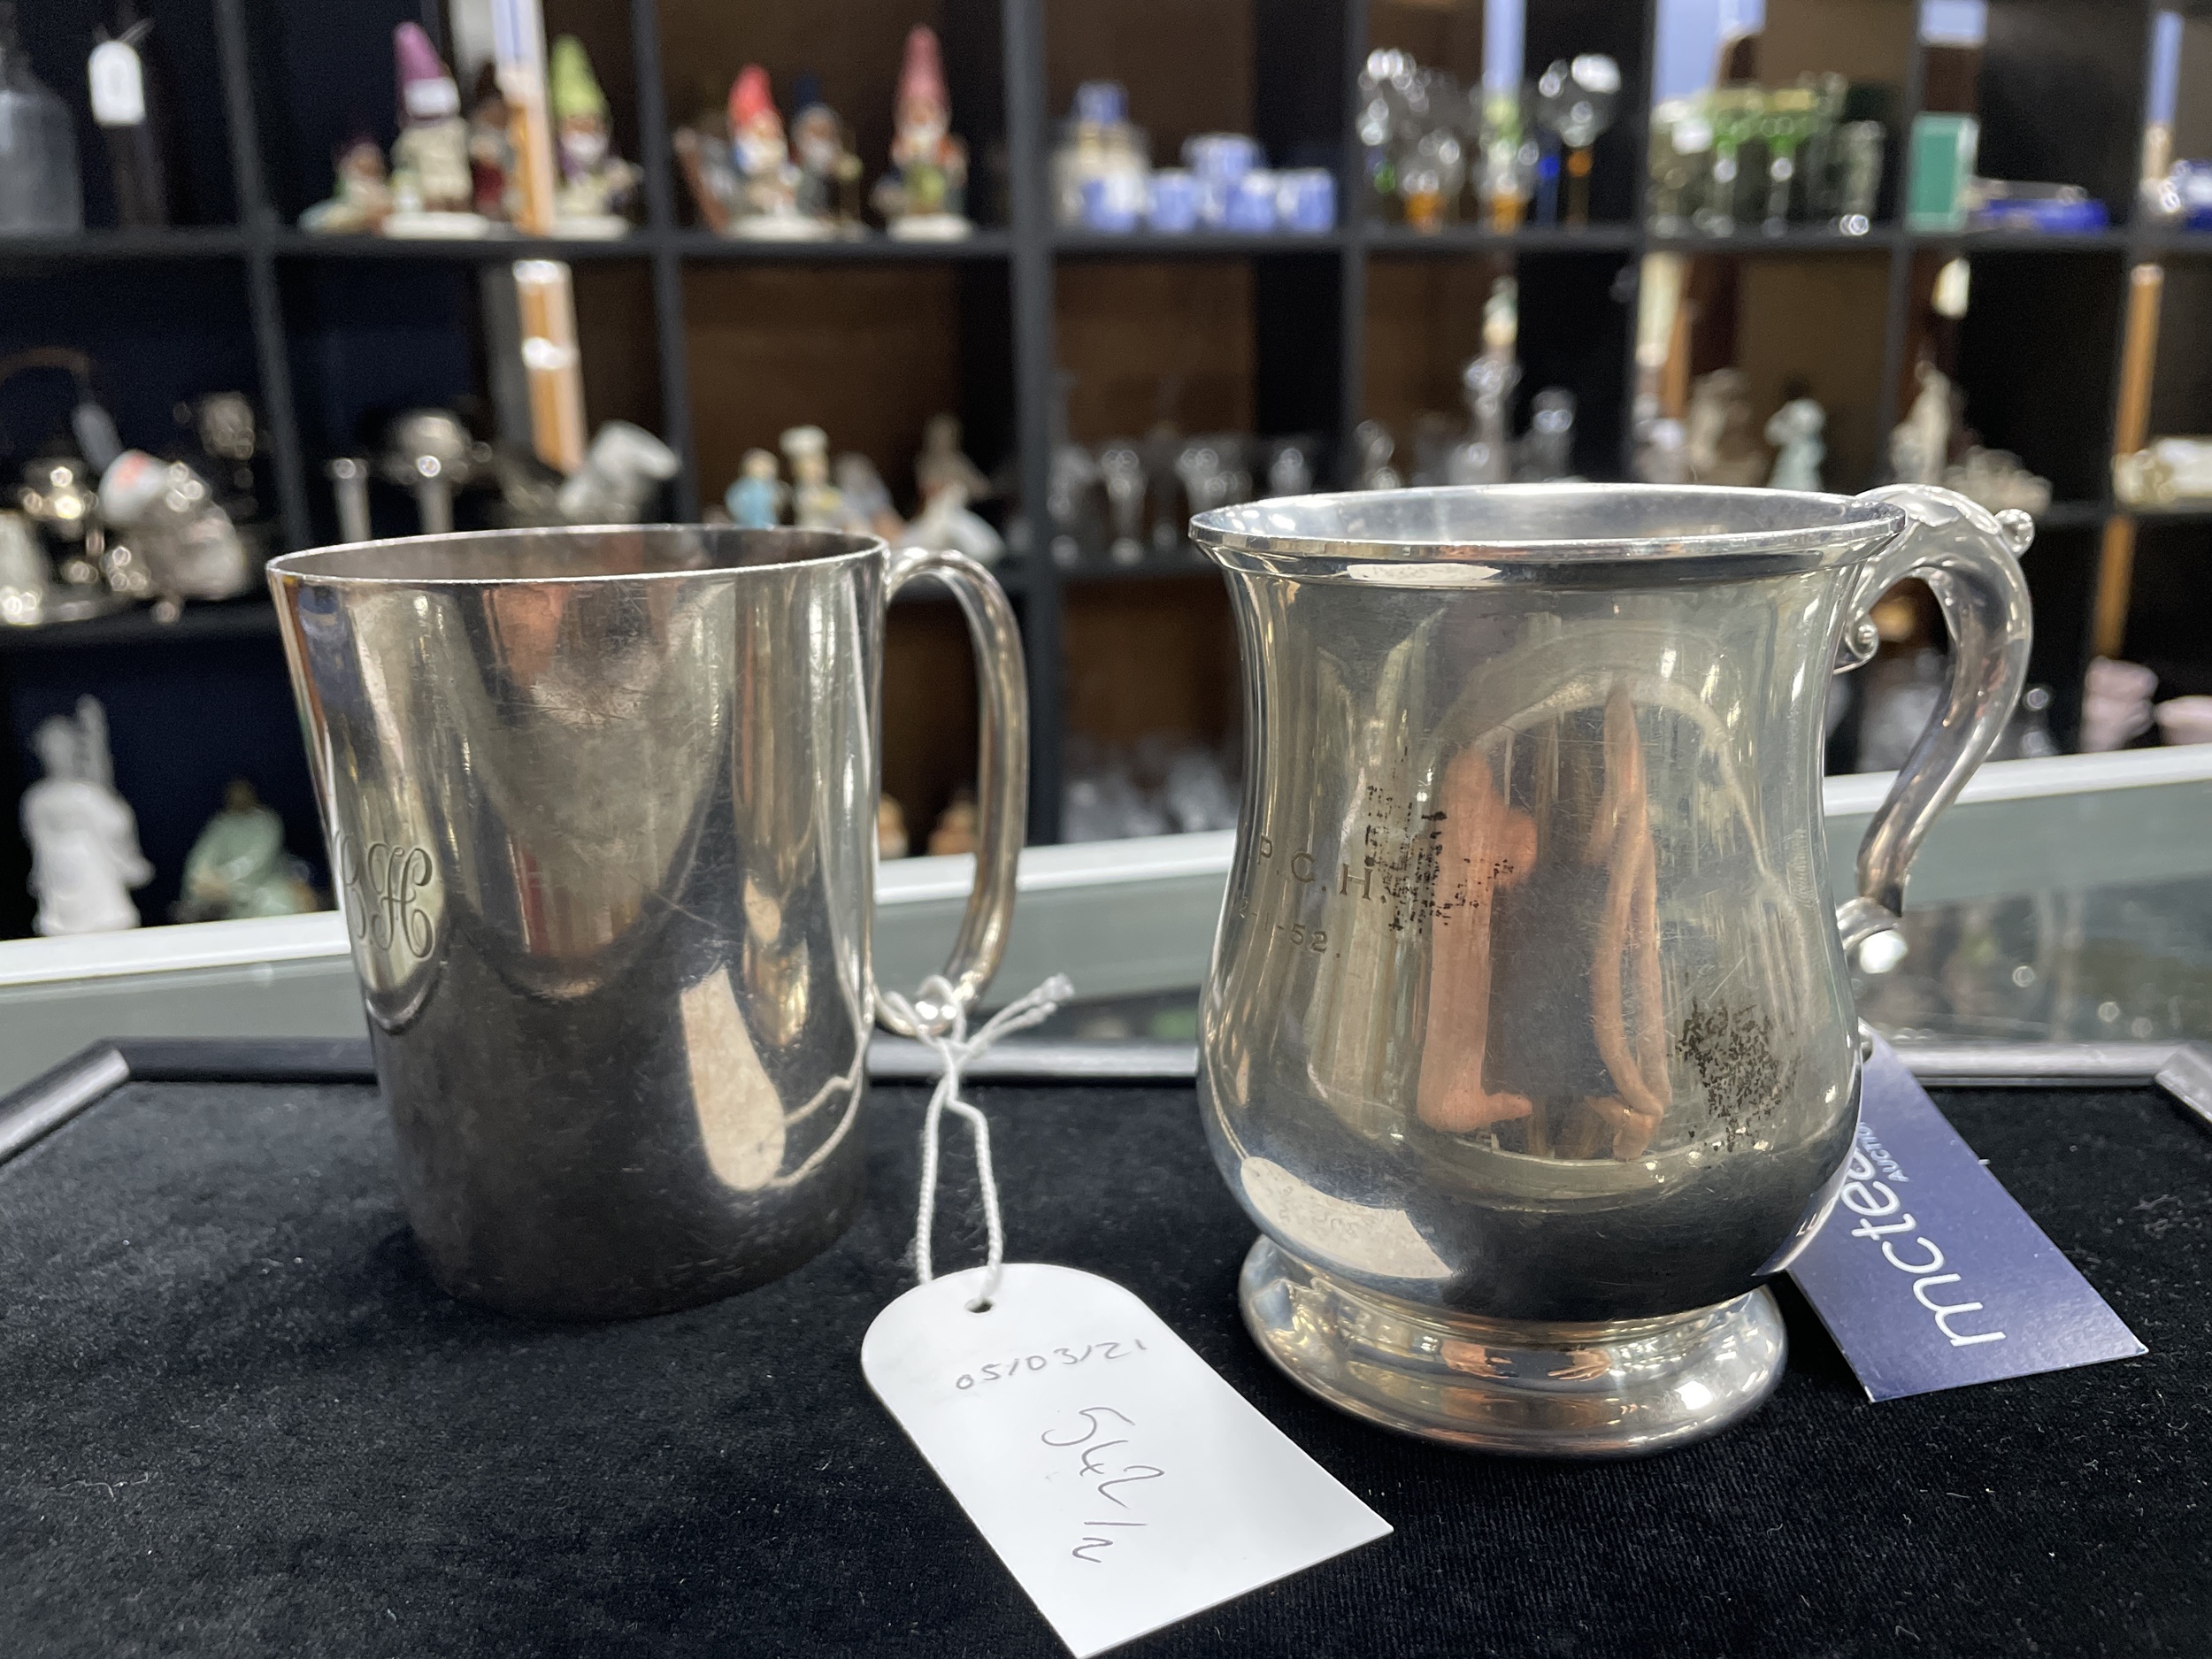 A SILVER CHRISTENING CUP AND A SILVER PLATED CUP